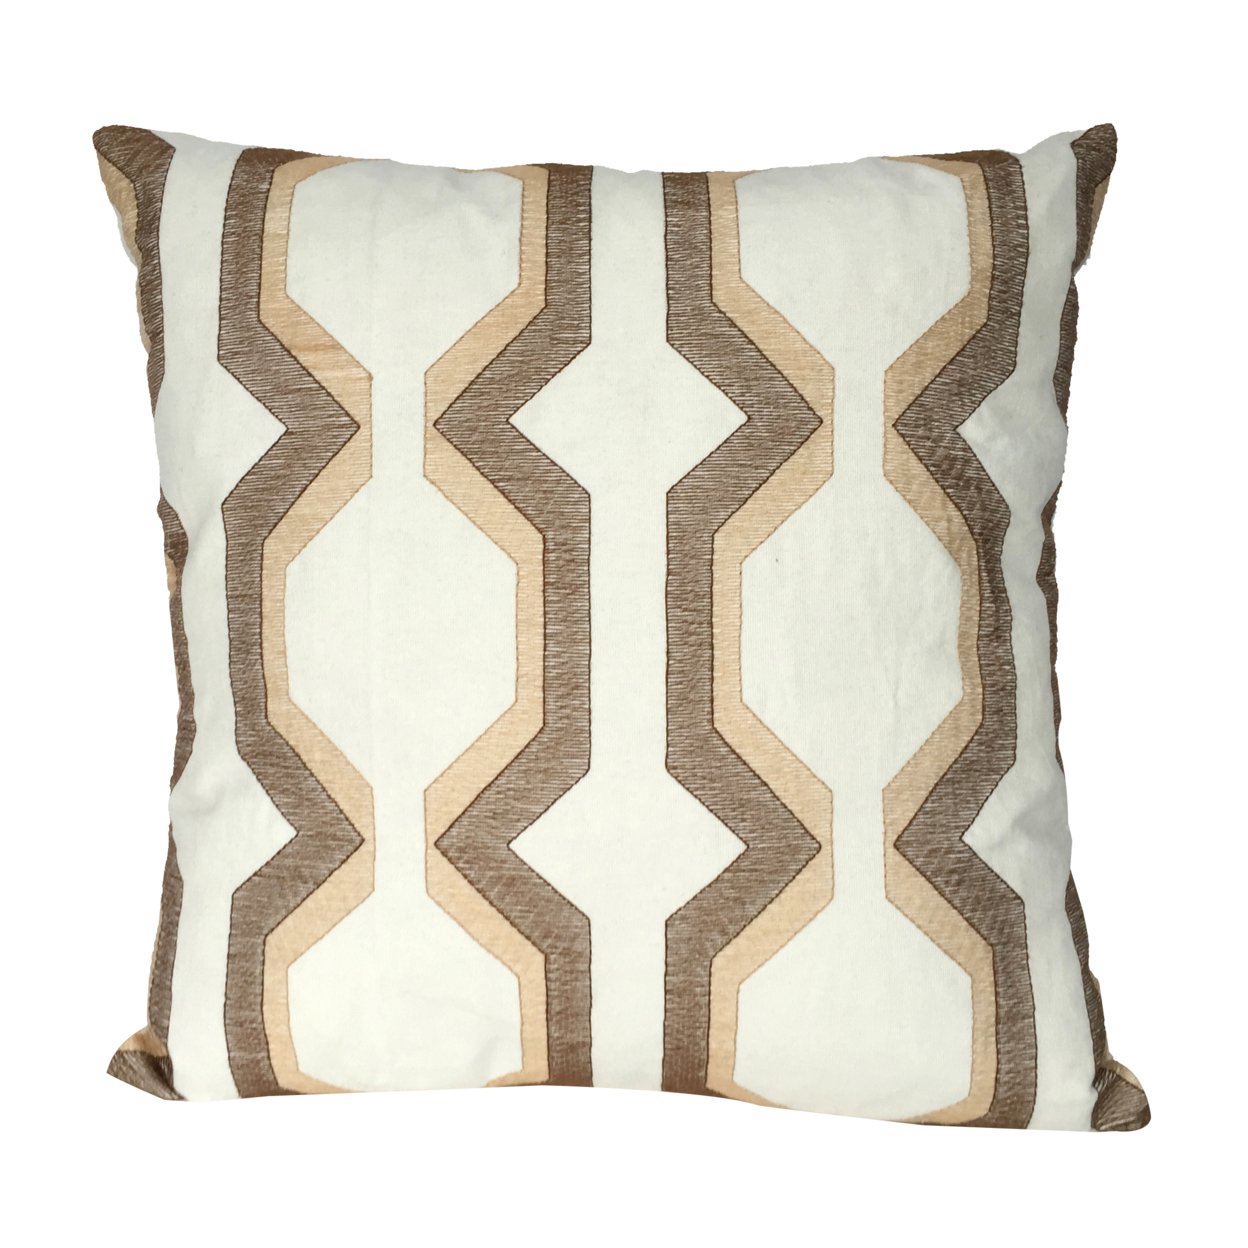 Contemporary Cotton Pillow With Geometric Embroidery, Brown And White- Saltoro Sherpi